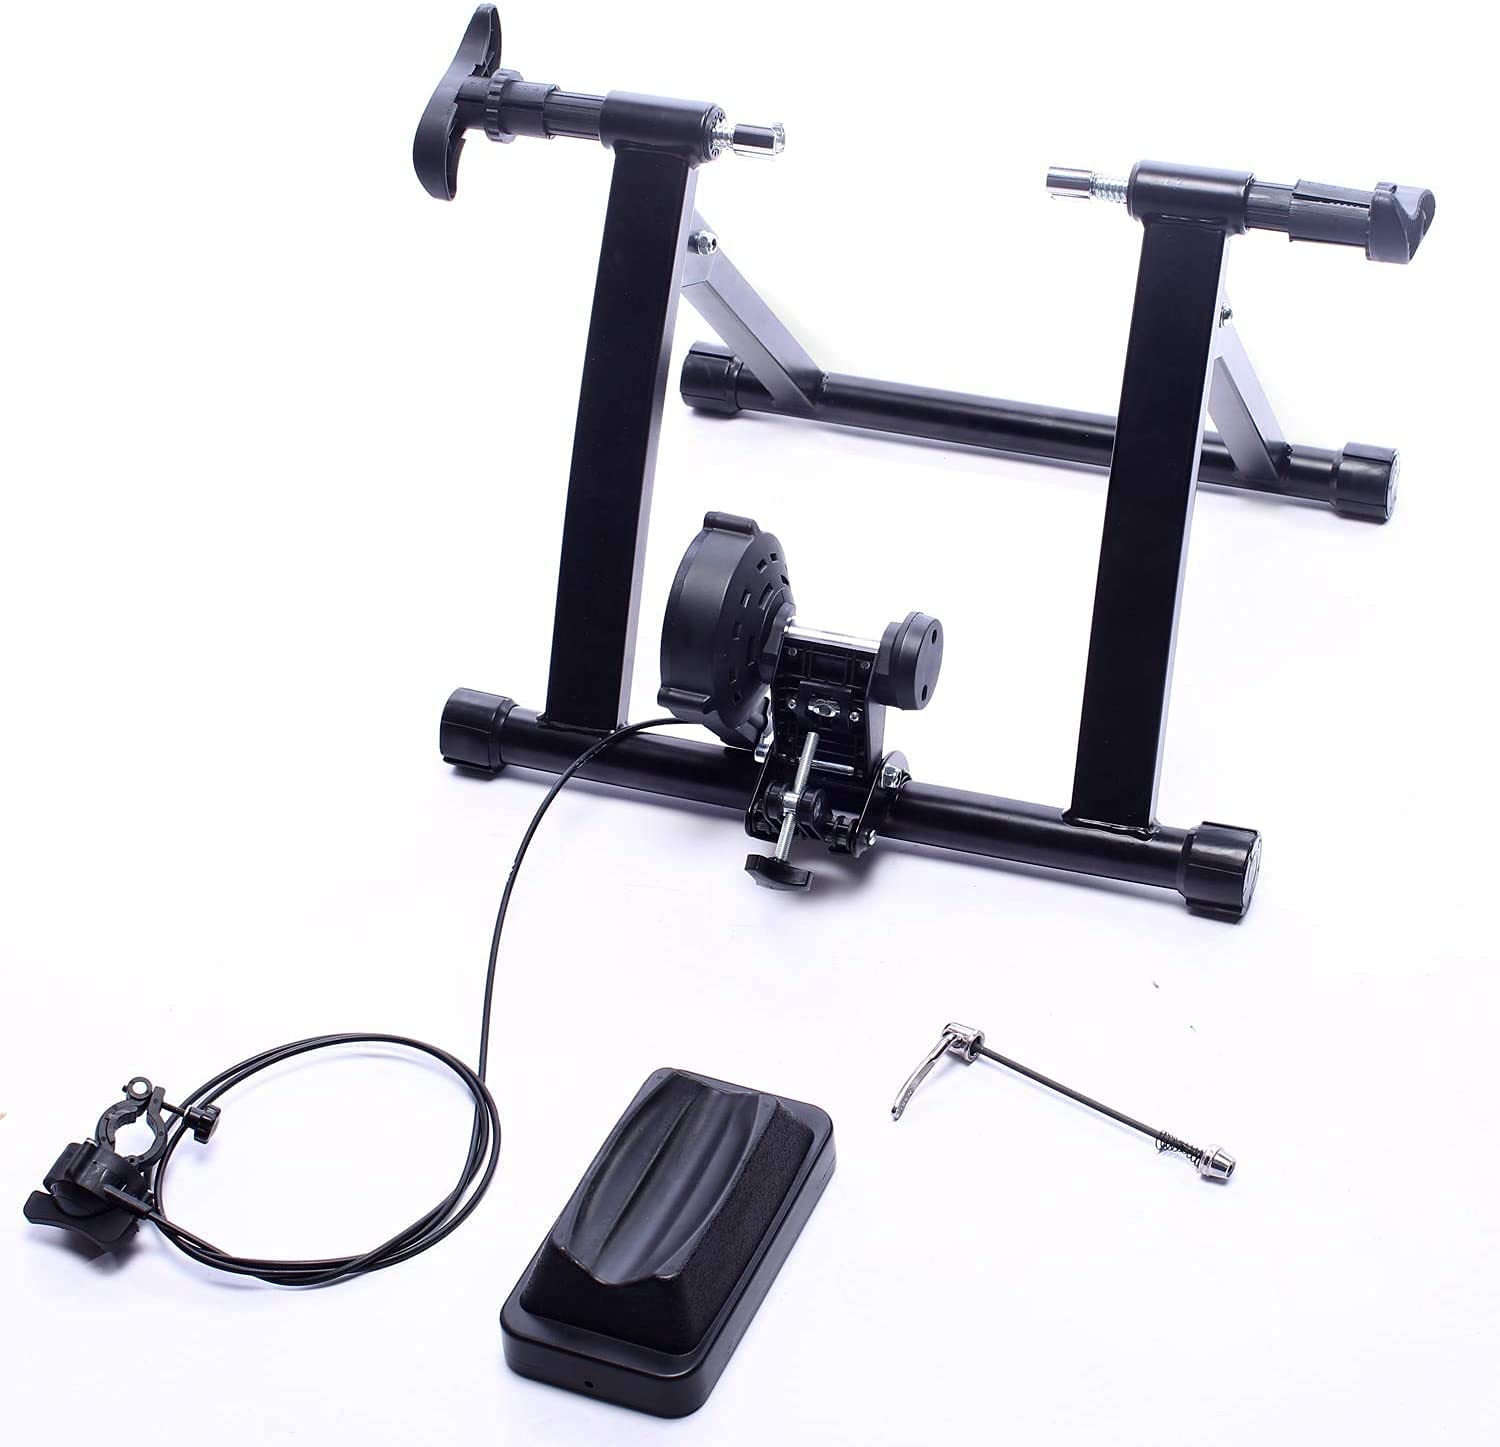 BalanceFrom Bike Trainer Stand Steel Bicycle Exercise Magnetic Stand w/ Front Wheel Riser Block (Black) $35 + Free Shipping